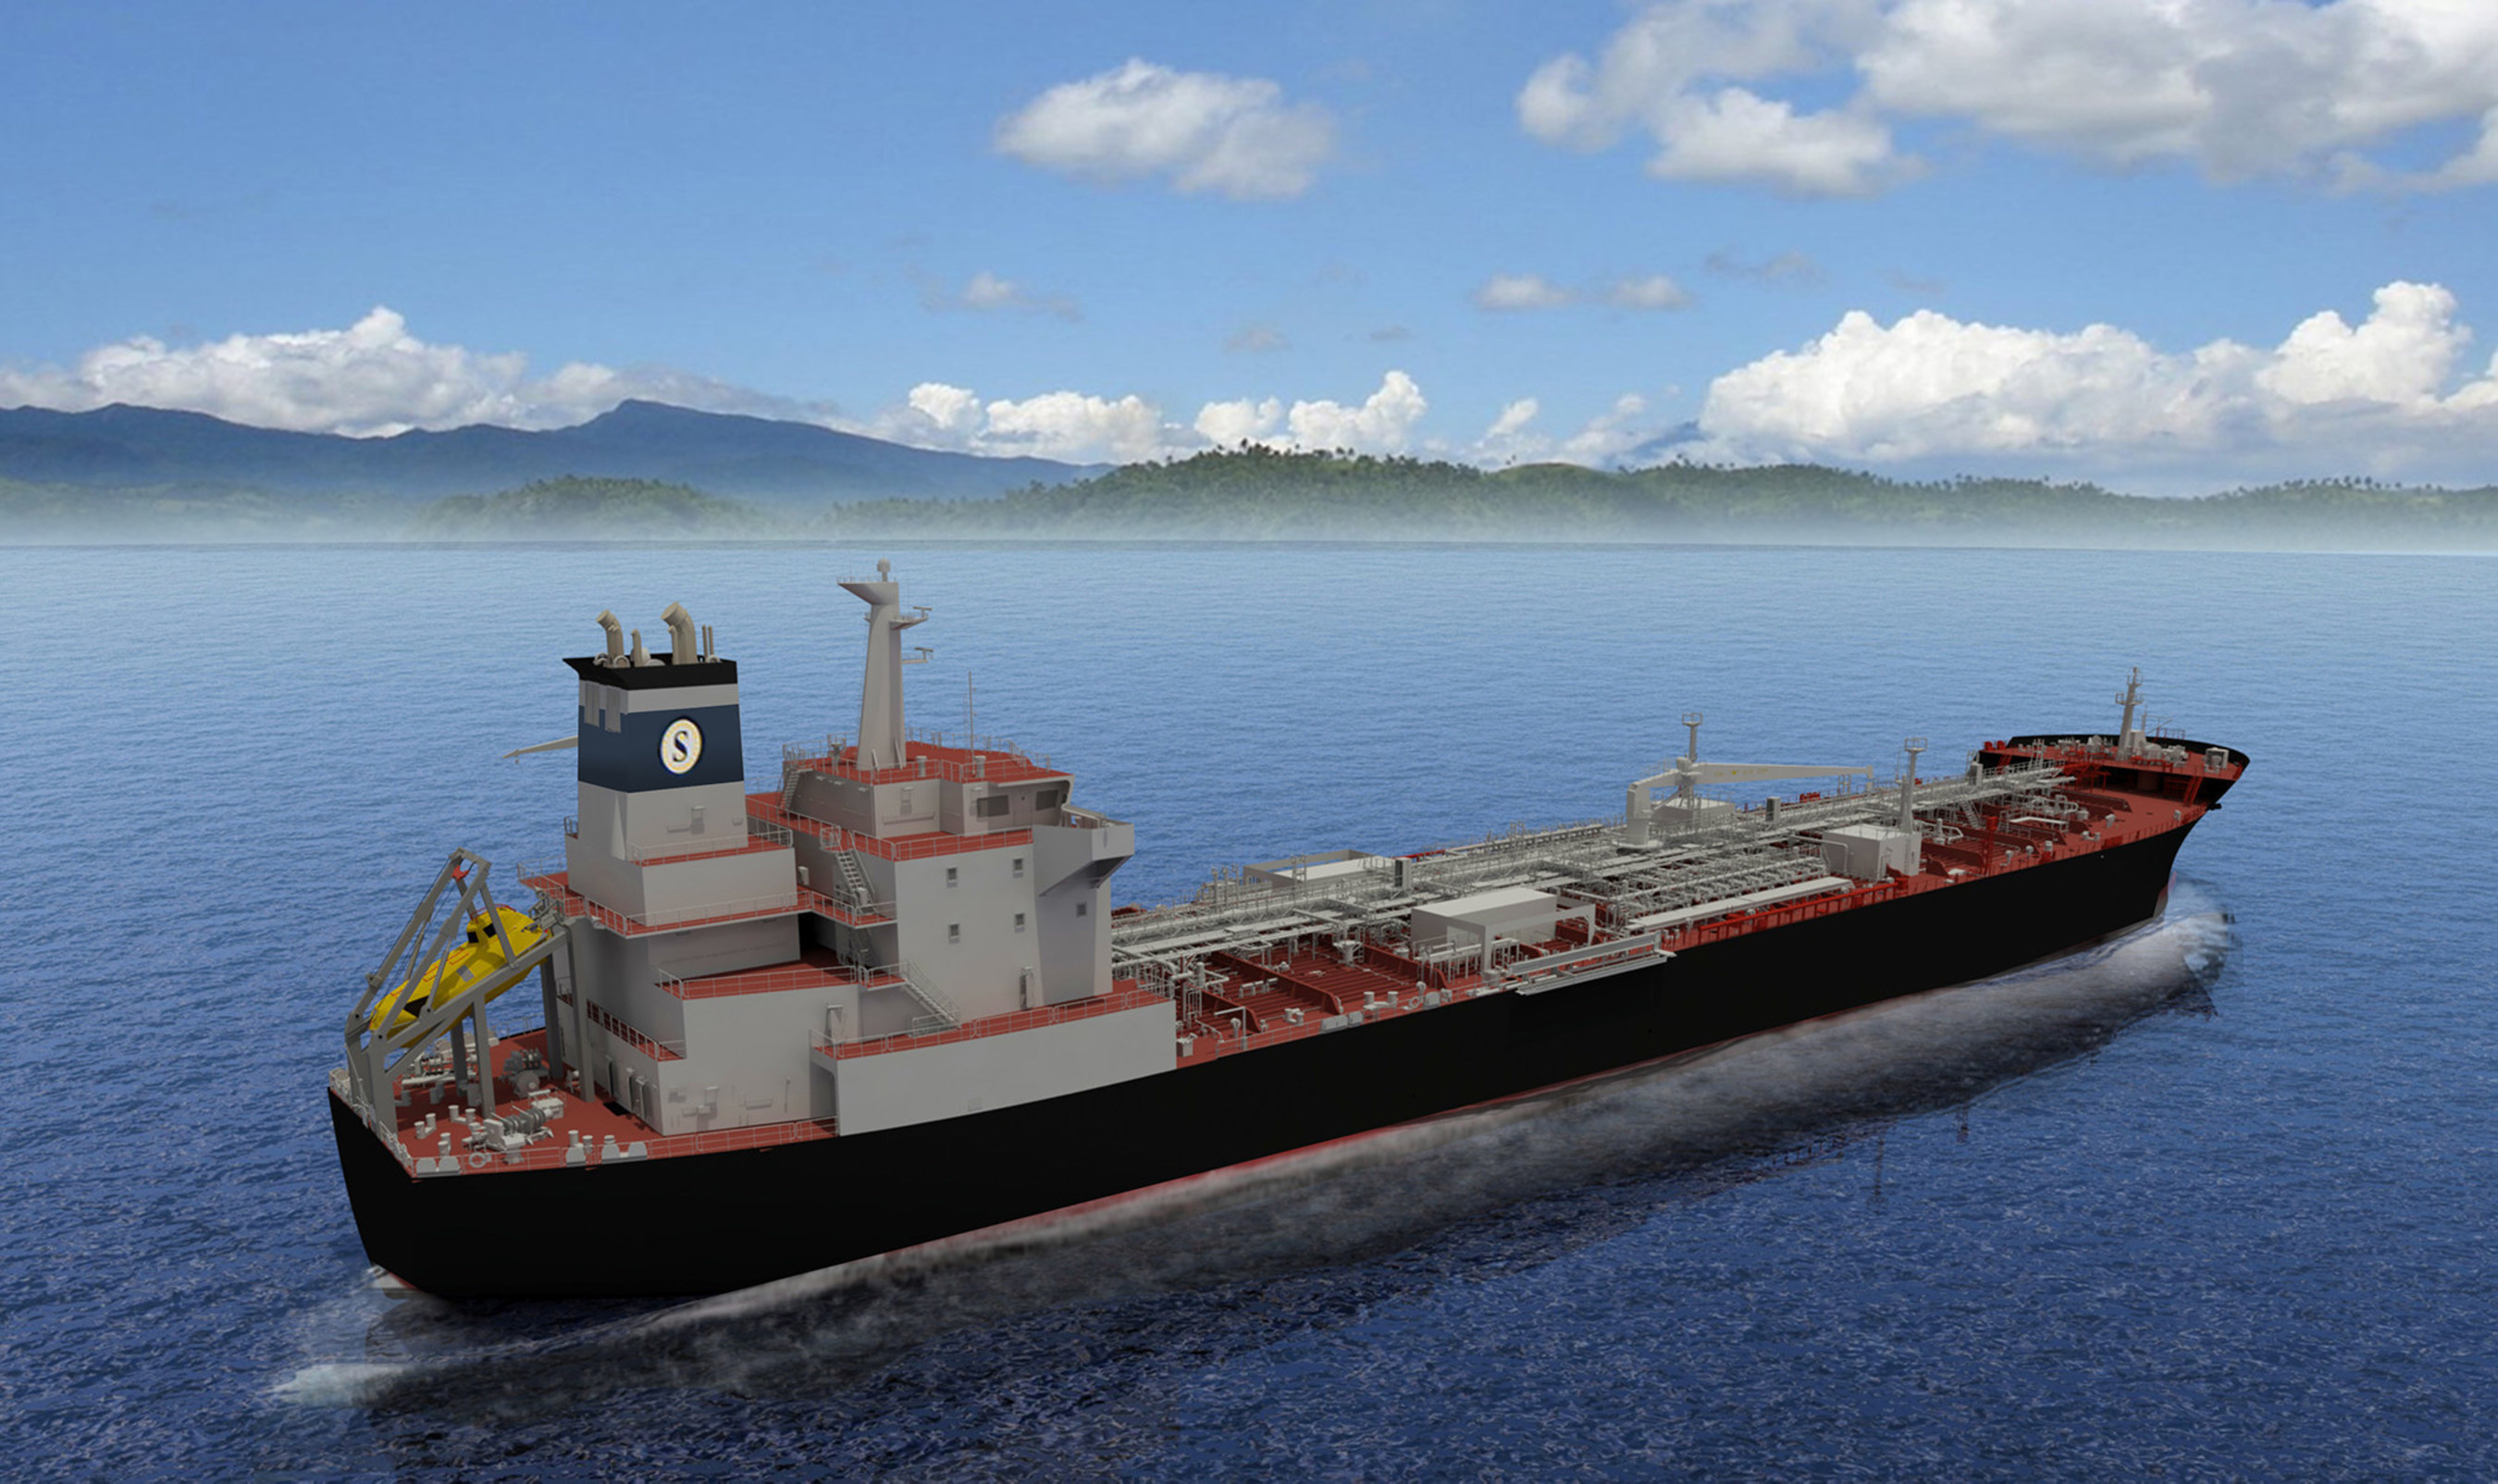 General Dynamics NASSCO Starts Construction on Third SEA-Vista Commercial Product Tanker. Today General Dynamics NASSCO signaled the start construction for the third product tanker to be built for SEA-Vista Newbuild II LLC, a subsidiary of SEACOR Holdings, Inc. The 610-foot tankers are a continuation of the ECO MR Tanker design, offering improved fuel efficiency and incorporating the latest environmental protection features, including a Ballast Water Treatment System and reduced emissions. When delivered, the tankers will be among the most fuel-efficient and environmentally-friendly tankers anywhere in the world.